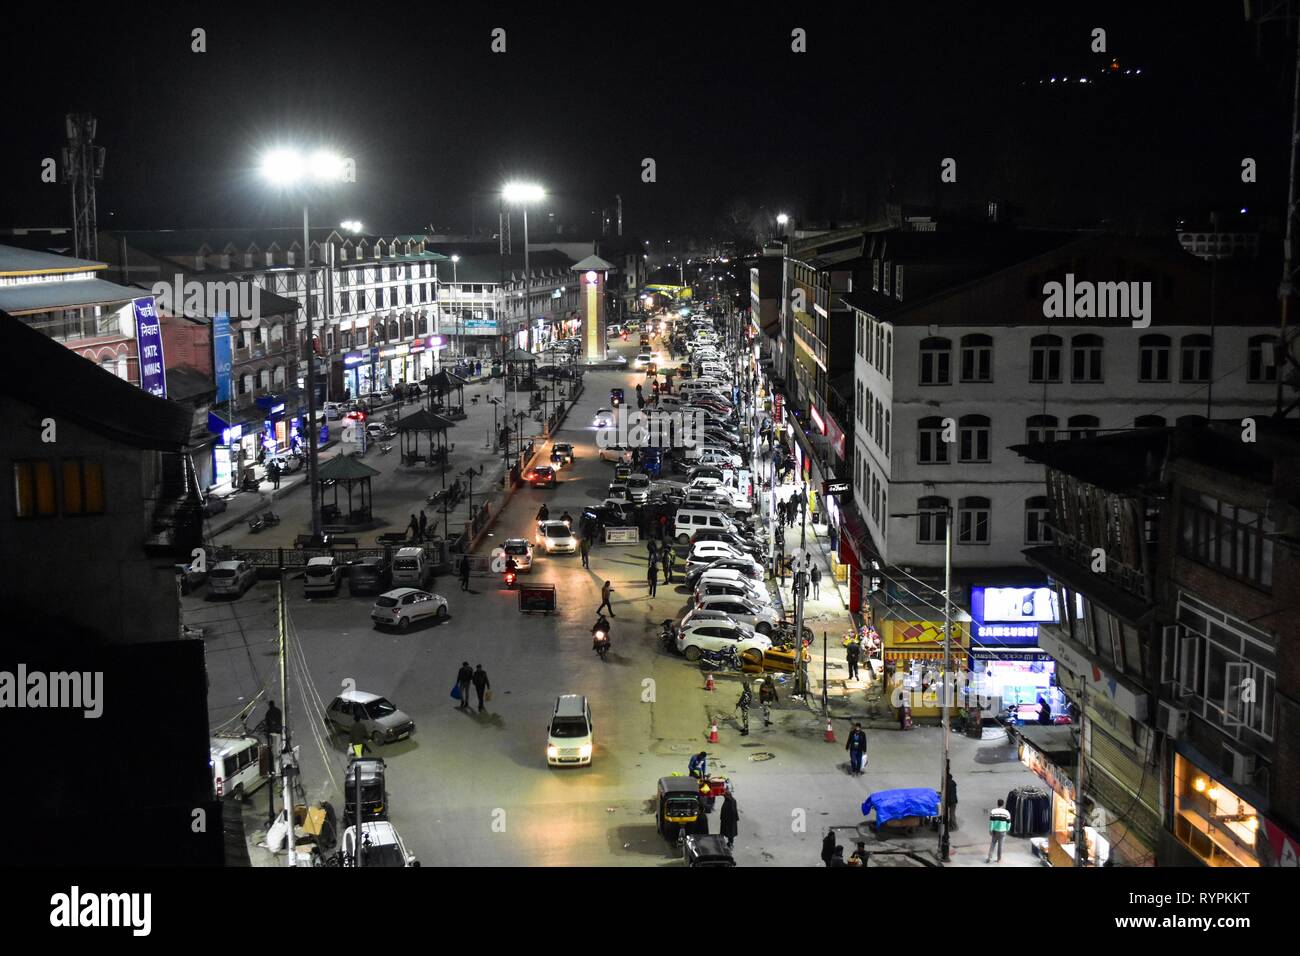 People seen busy shopping at a commercial hub Lal chowk during night hours in Srinagar, Kashmir. Kashmir is the northernmost geographical region of the Indian subcontinent. It is currently a disputed territory, administered by three countries: India, Pakistan and China. Stock Photo